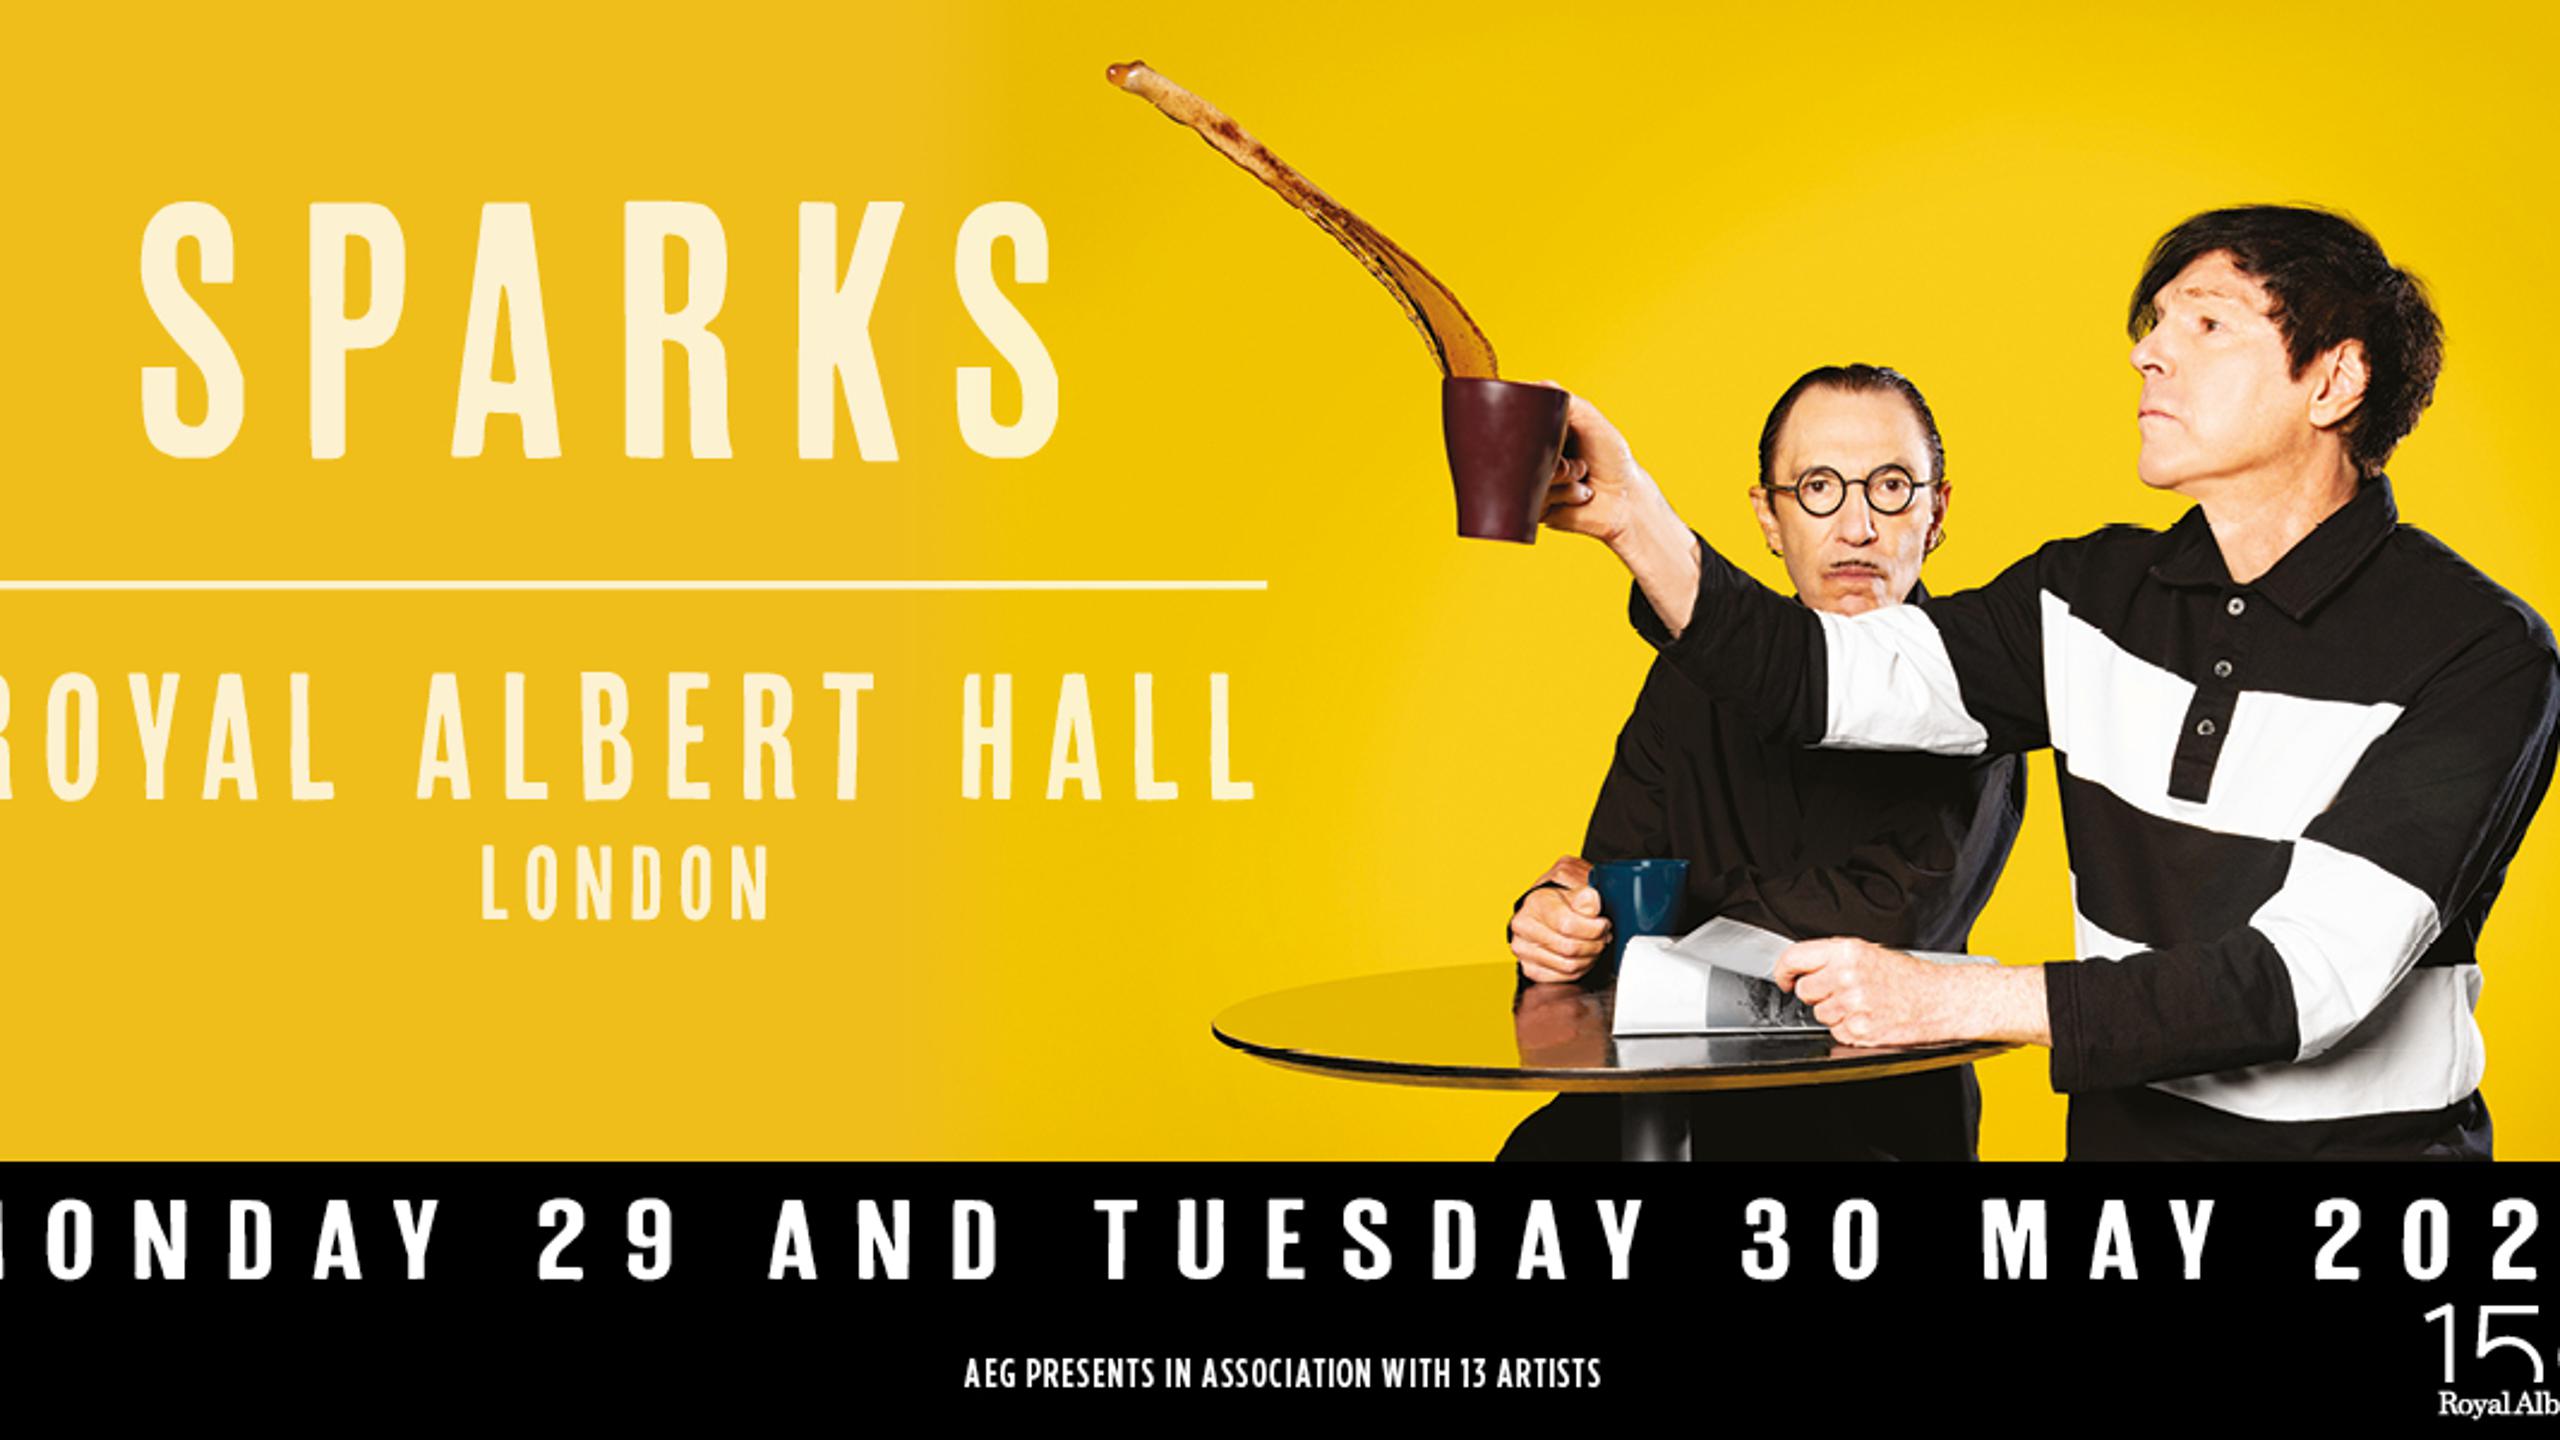 Sparks concert tickets for Royal Albert Hall, London Monday, 29 May